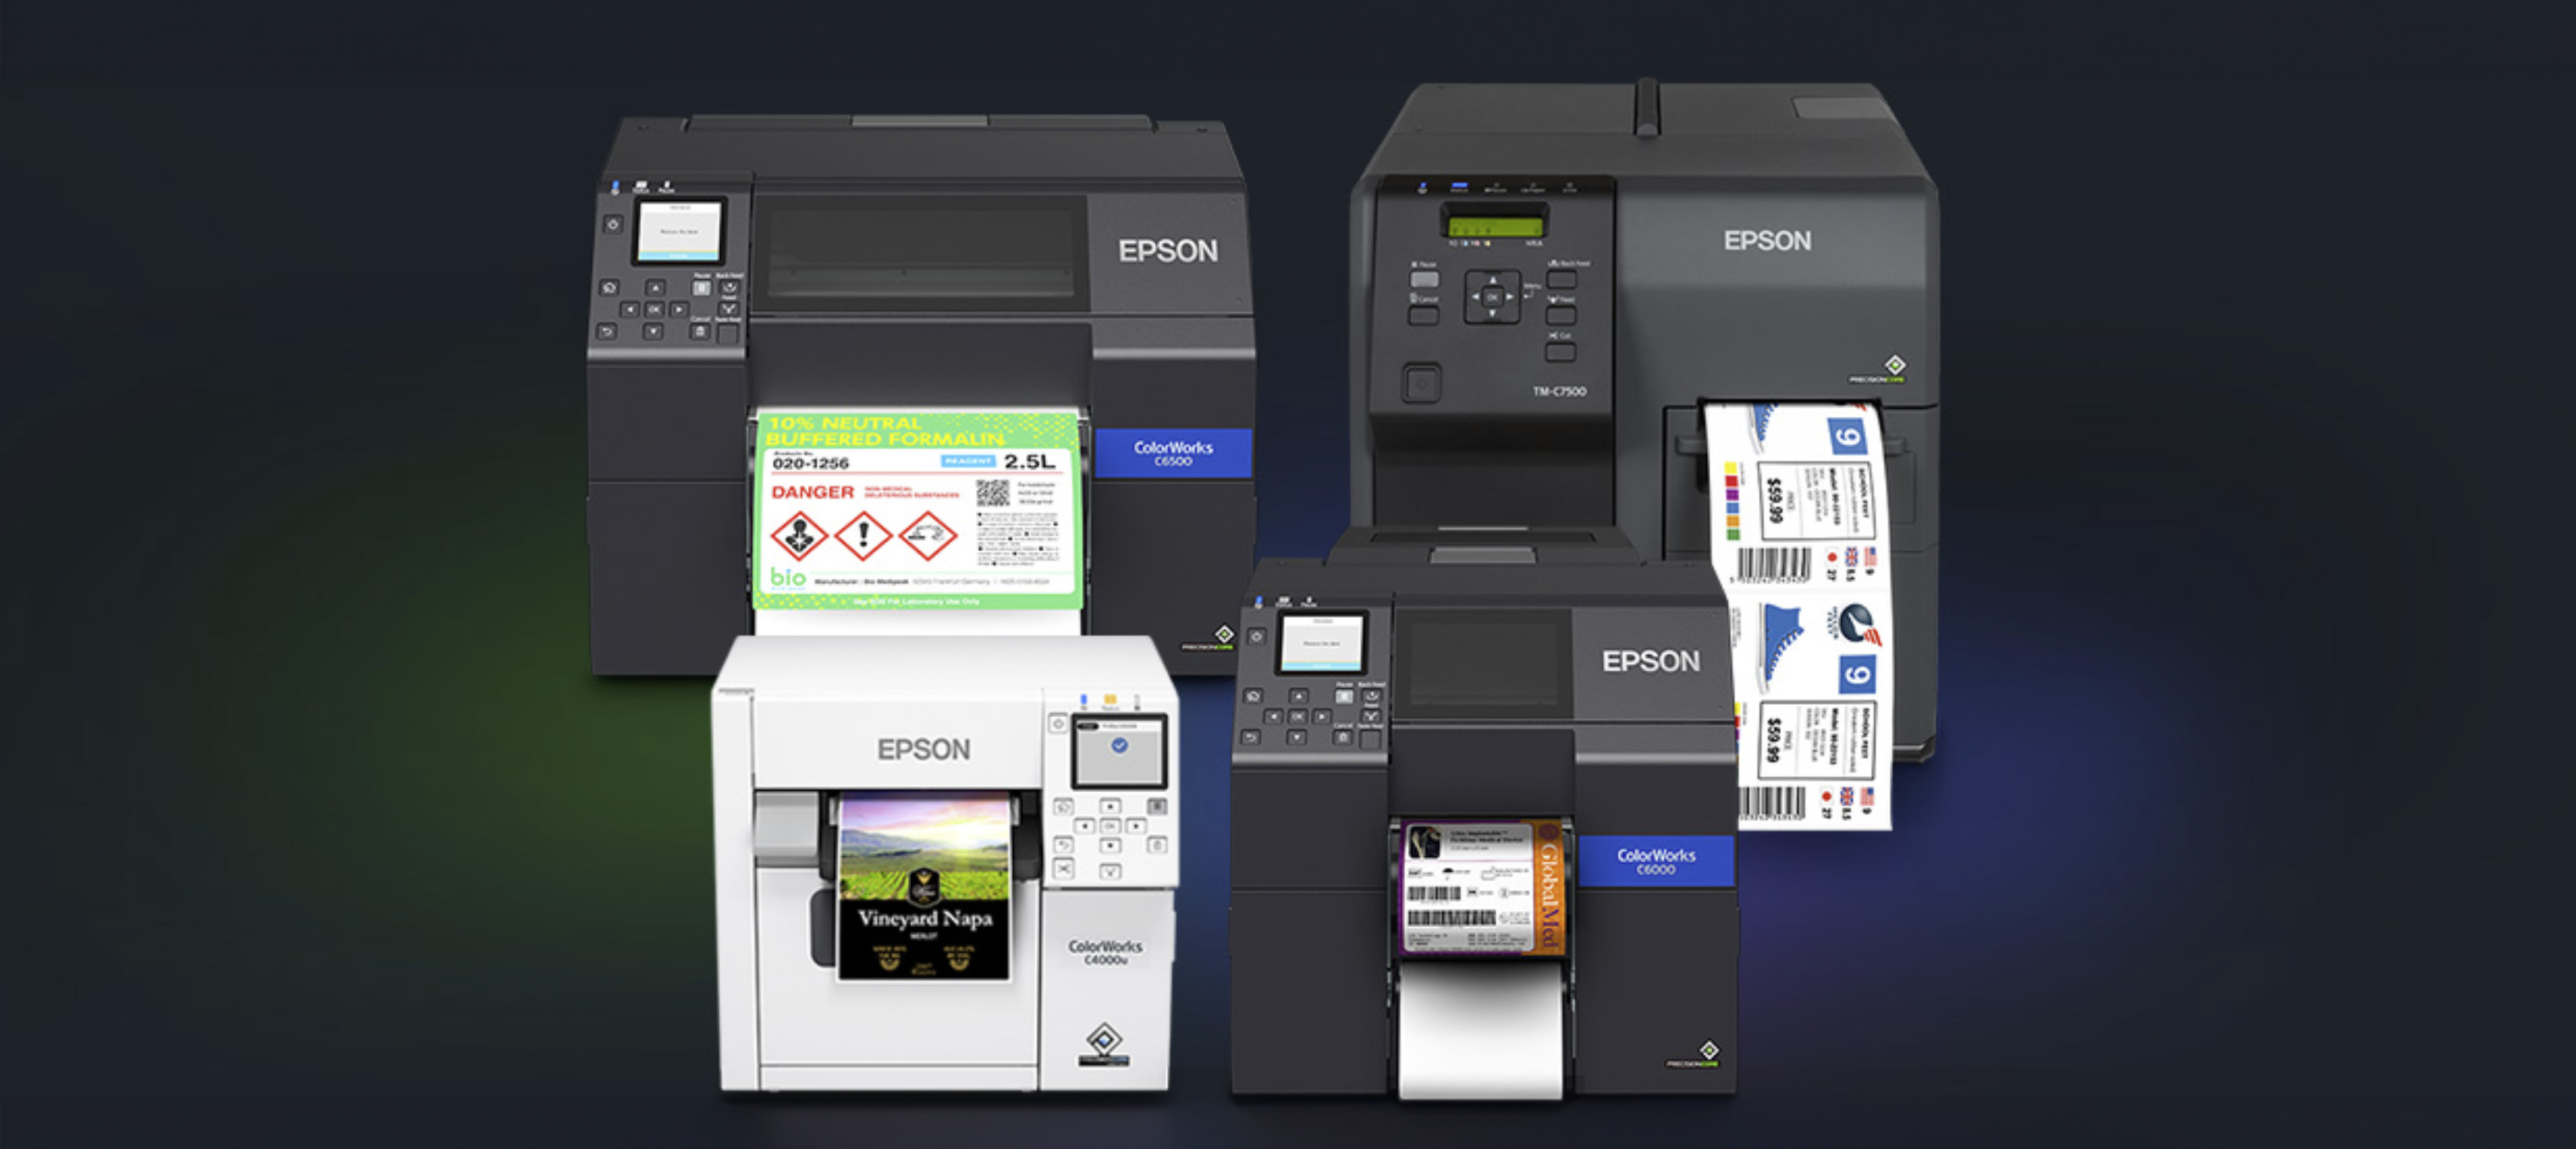 Epson ColorWorks printers in a collage on a black background with light underneath.